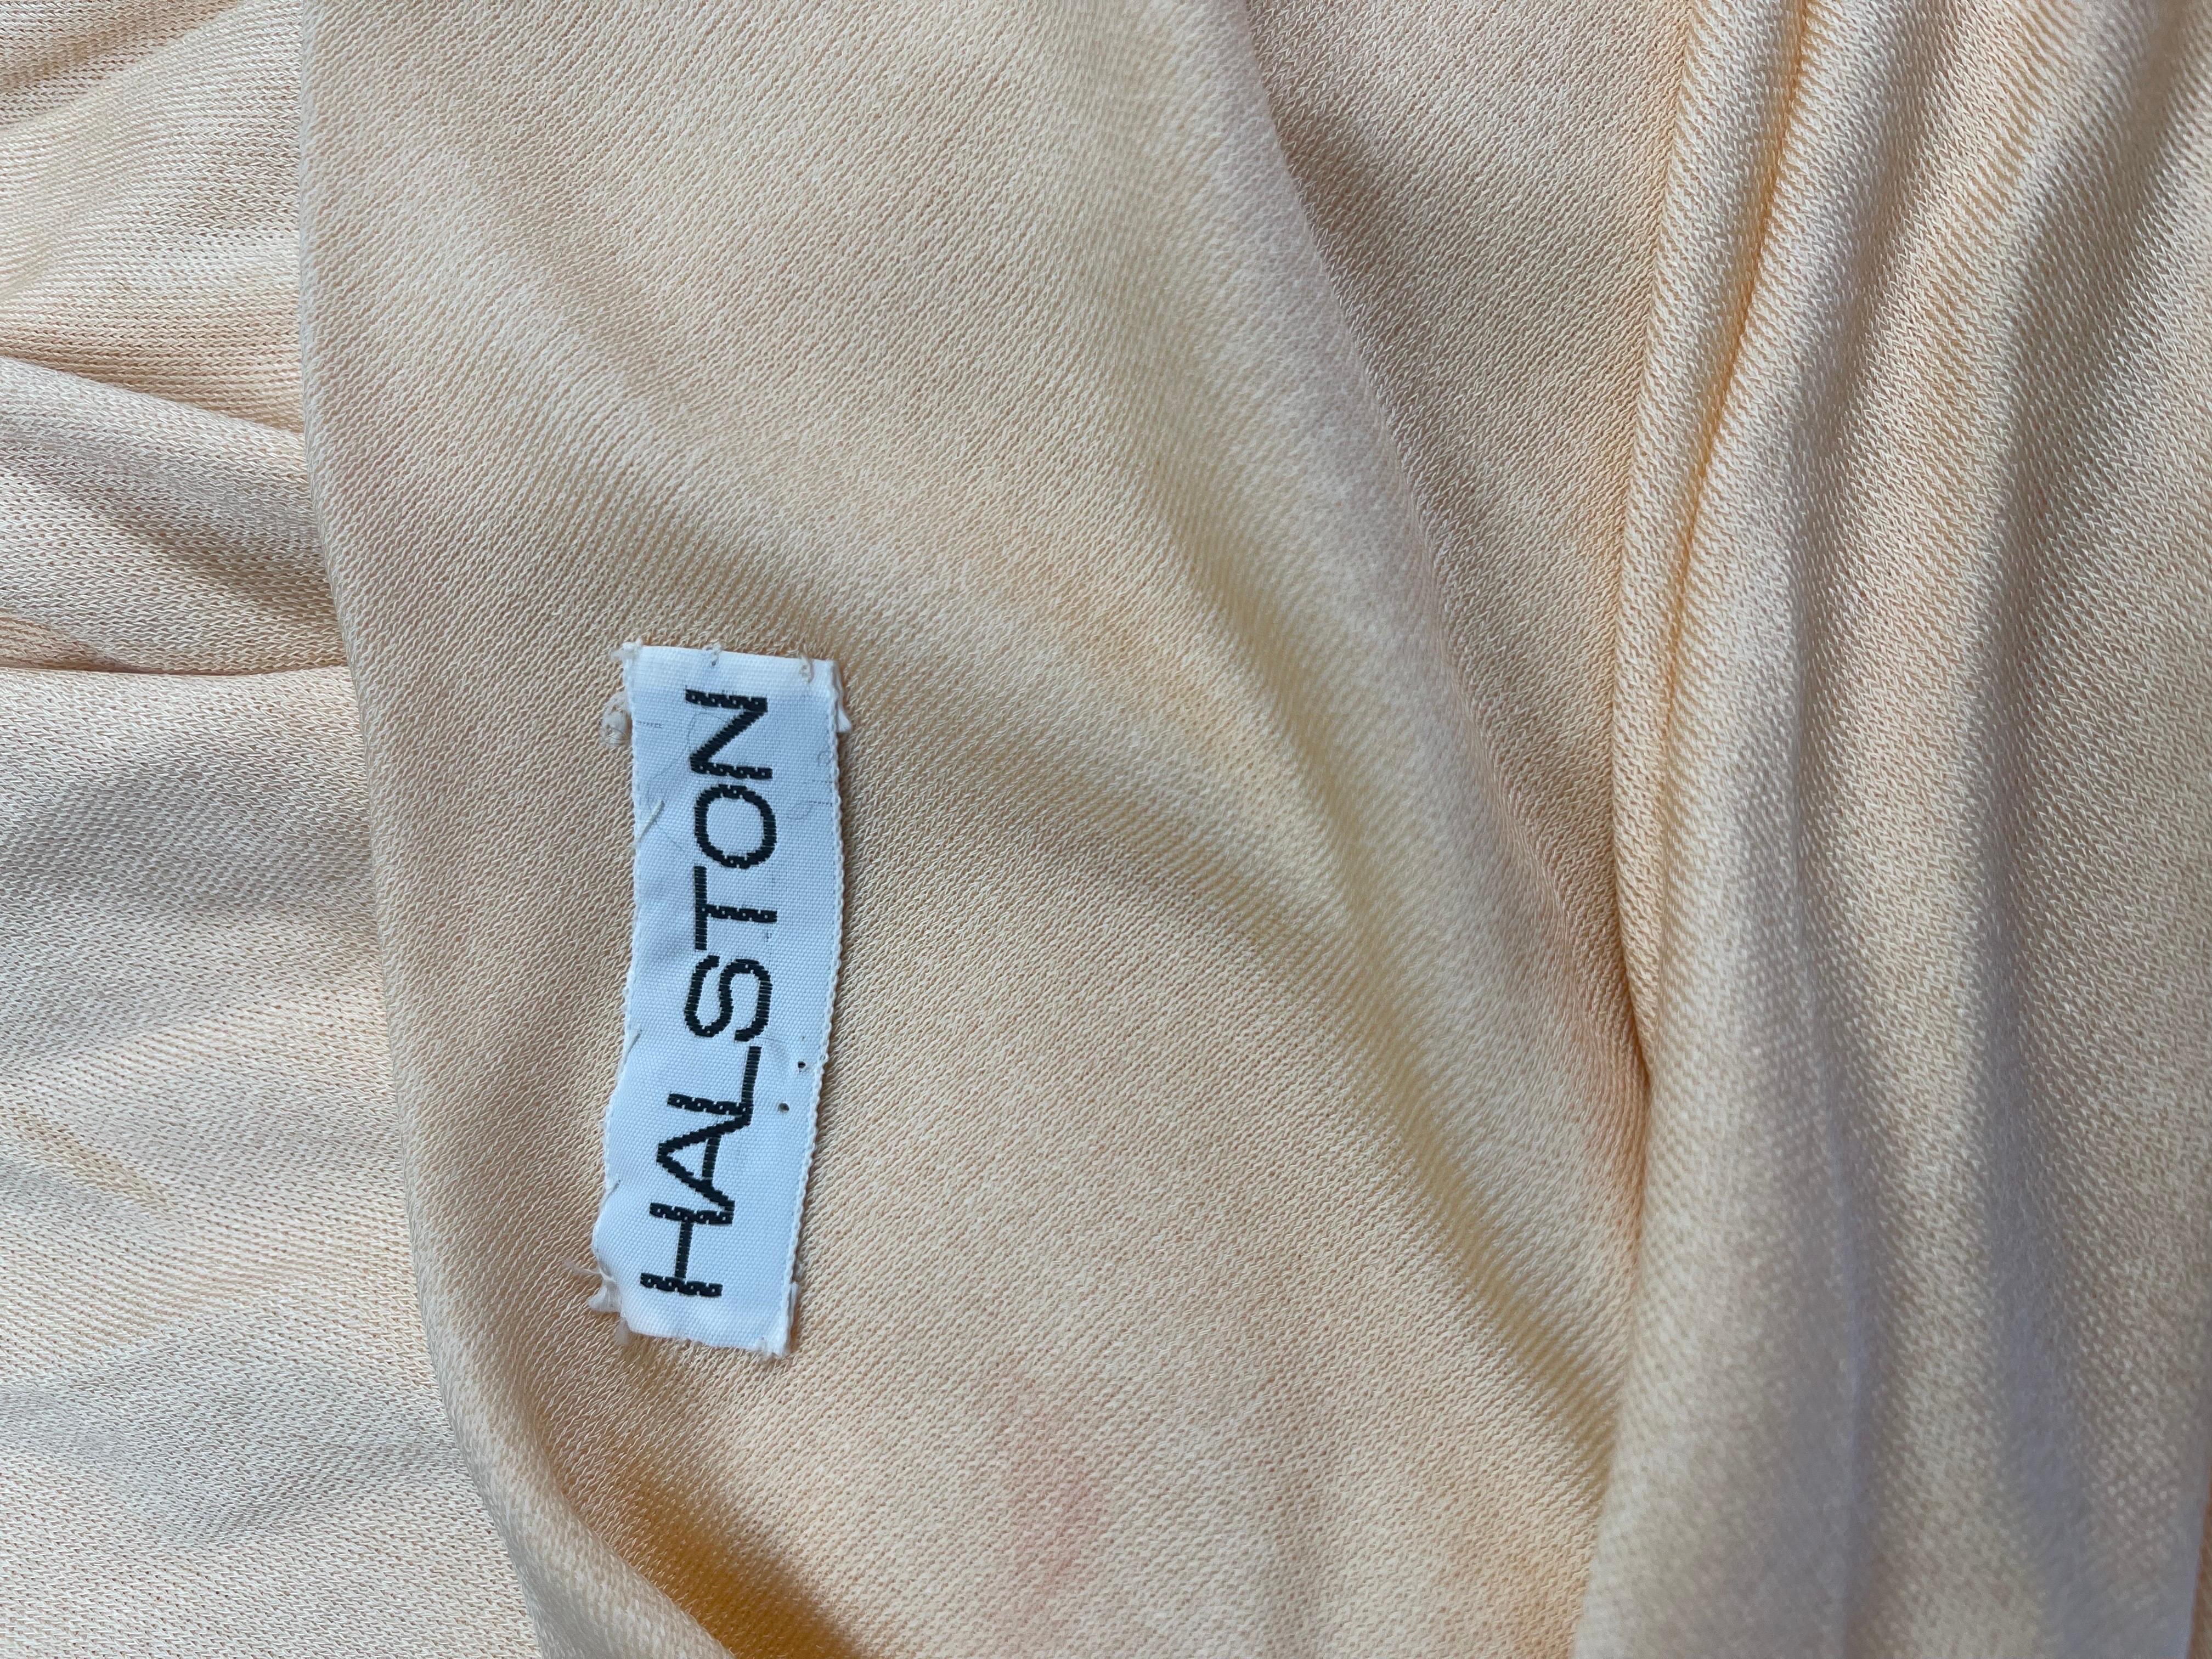 Beautiful 1970s HALSTON silk jersey slinky dress ! The perfect champagne / buttercream / soft yellow color is great for any time of year. Simply slips over the head and stretches to fit. Elastic waistband. This is an exceptional example of Halston’s